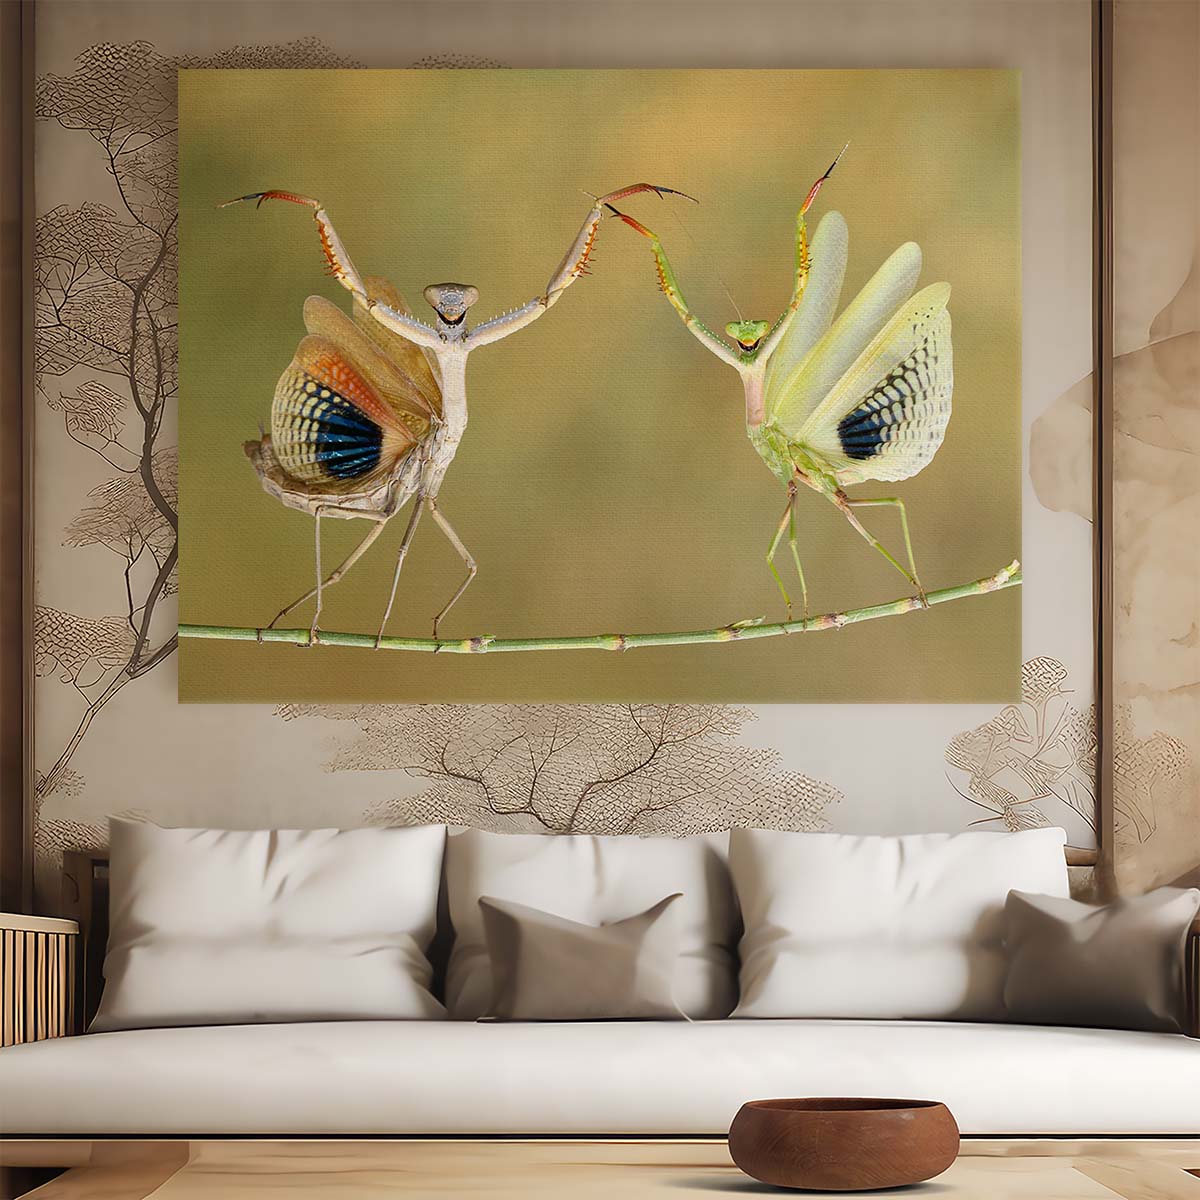 Joyful Ballet of Praying Mantises Duo Wall Art by Luxuriance Designs. Made in USA.